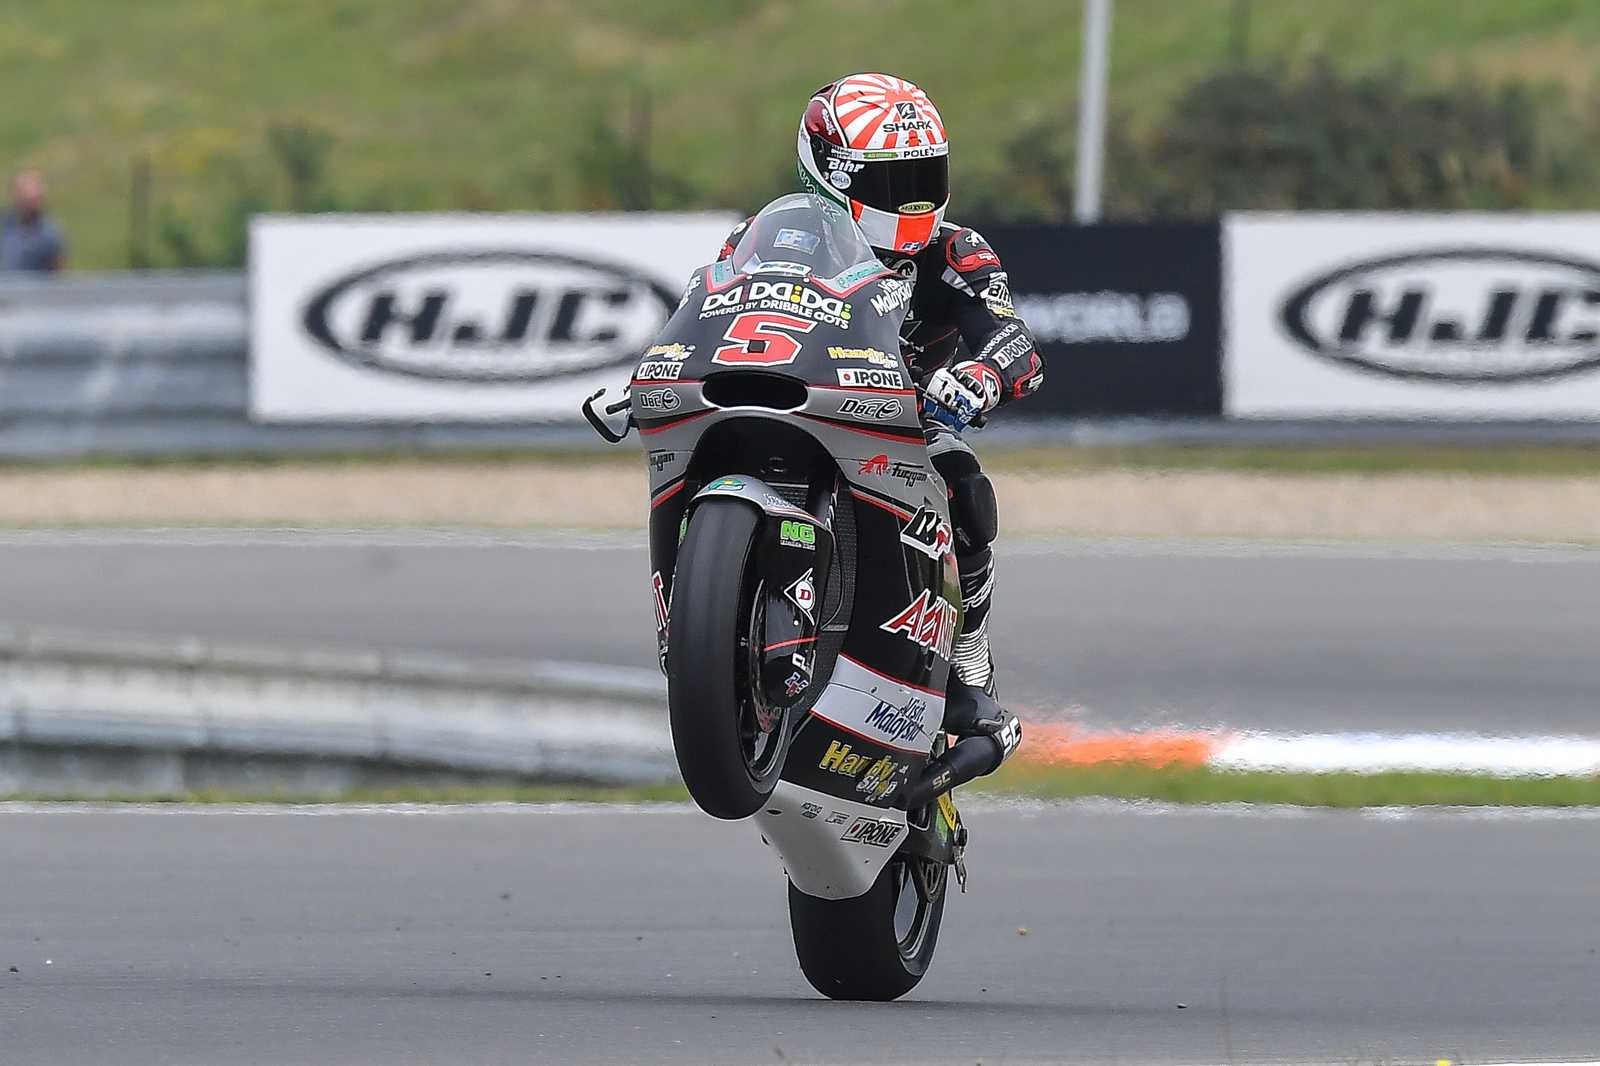 Zarco Edges Out Luthi In Moto2 FP2 At Brno - Roadracing World Magazine ...